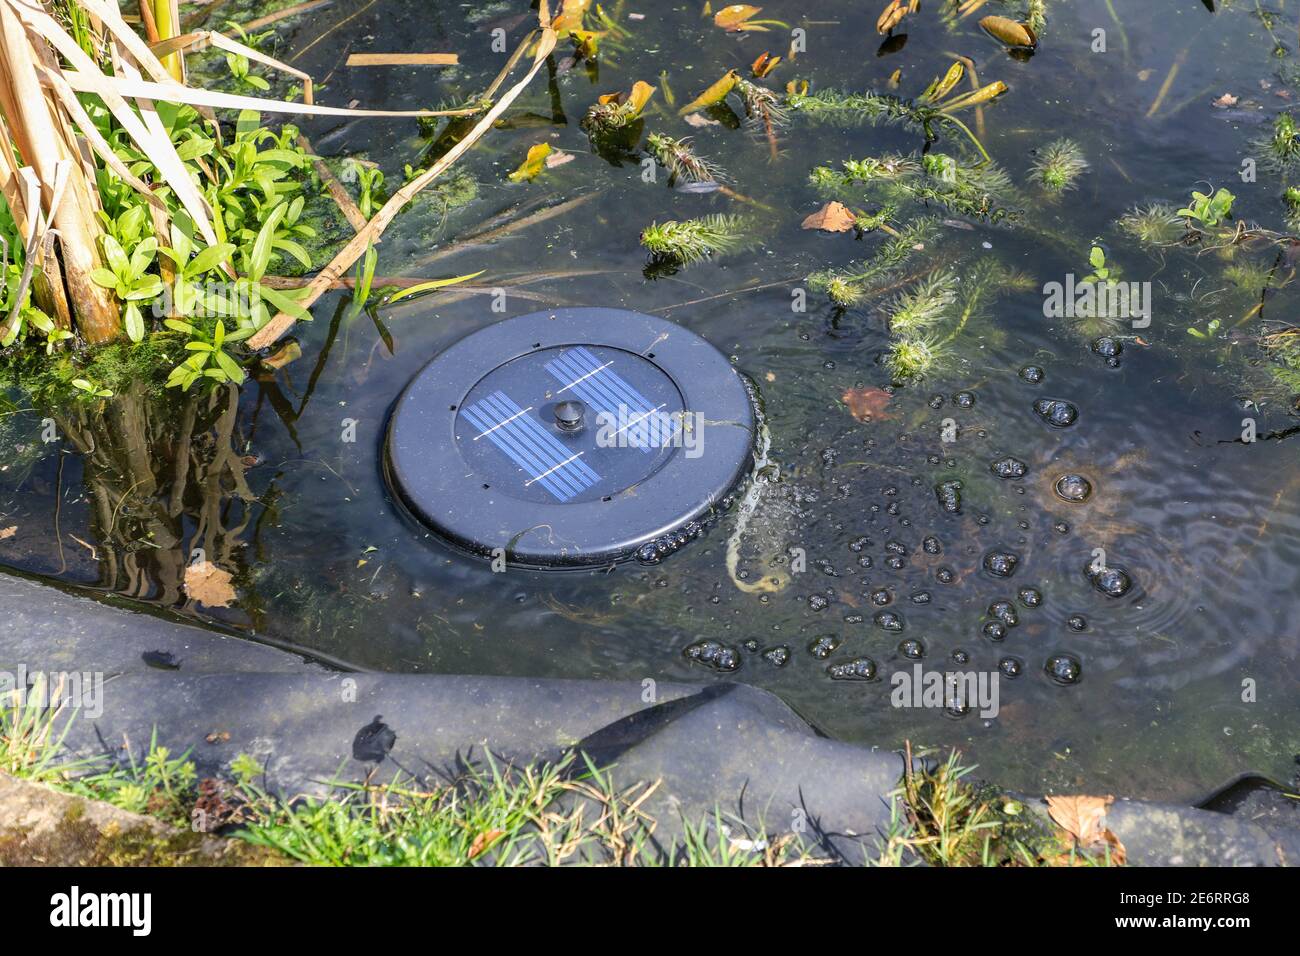 A solar powered pond aeration device, pond aeration kit, pond oxygenator, or aerator in a small domestic pond, England, UK Stock Photo